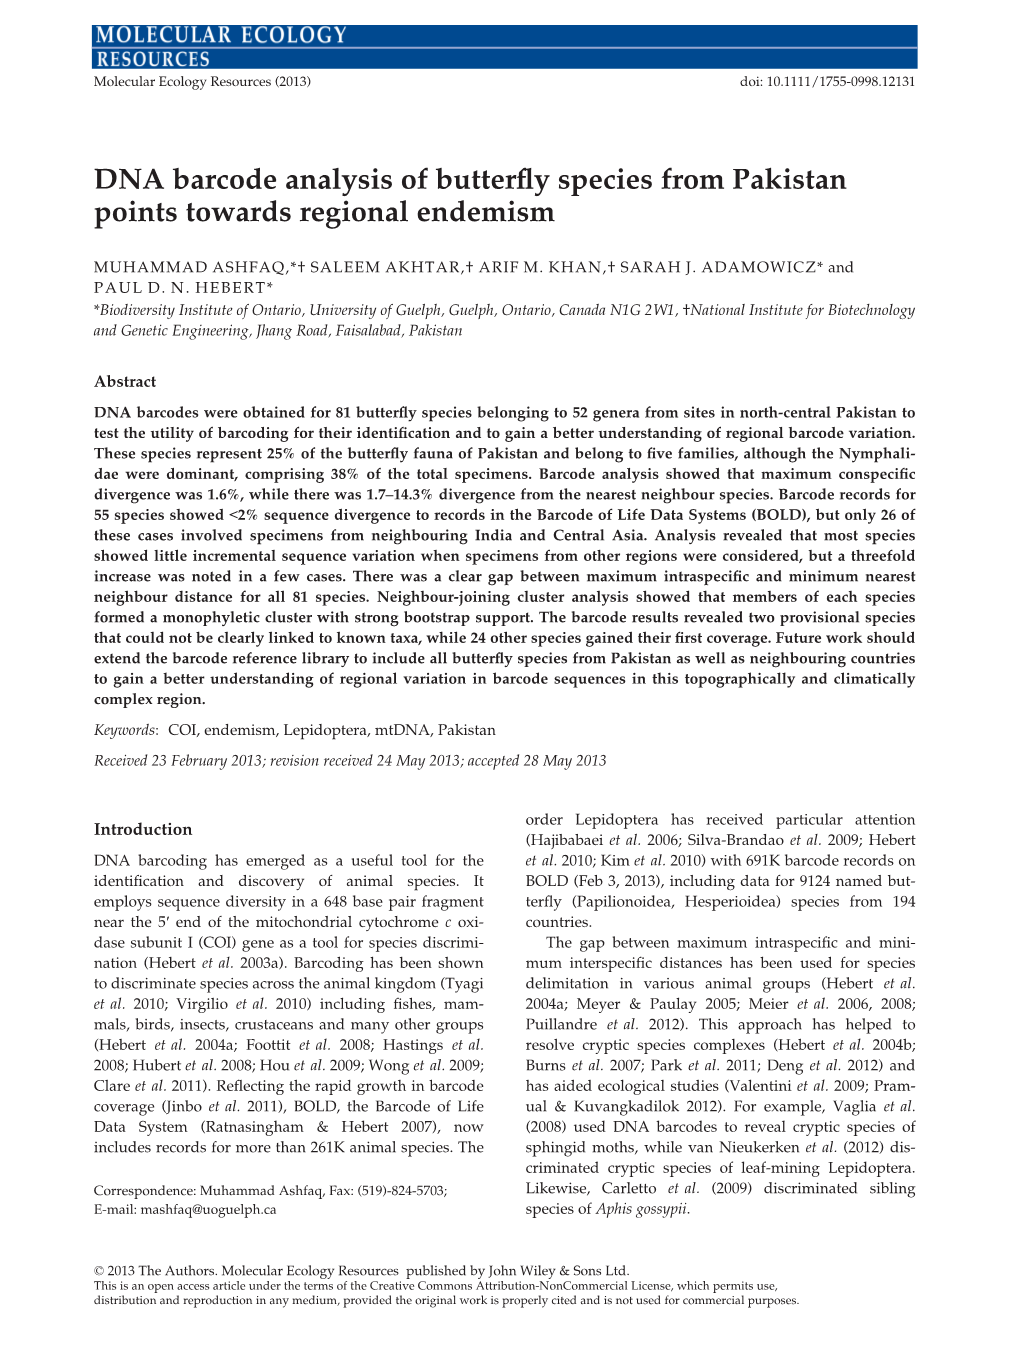 DNA Barcode Analysis of Butterfly Species from Pakistan Points